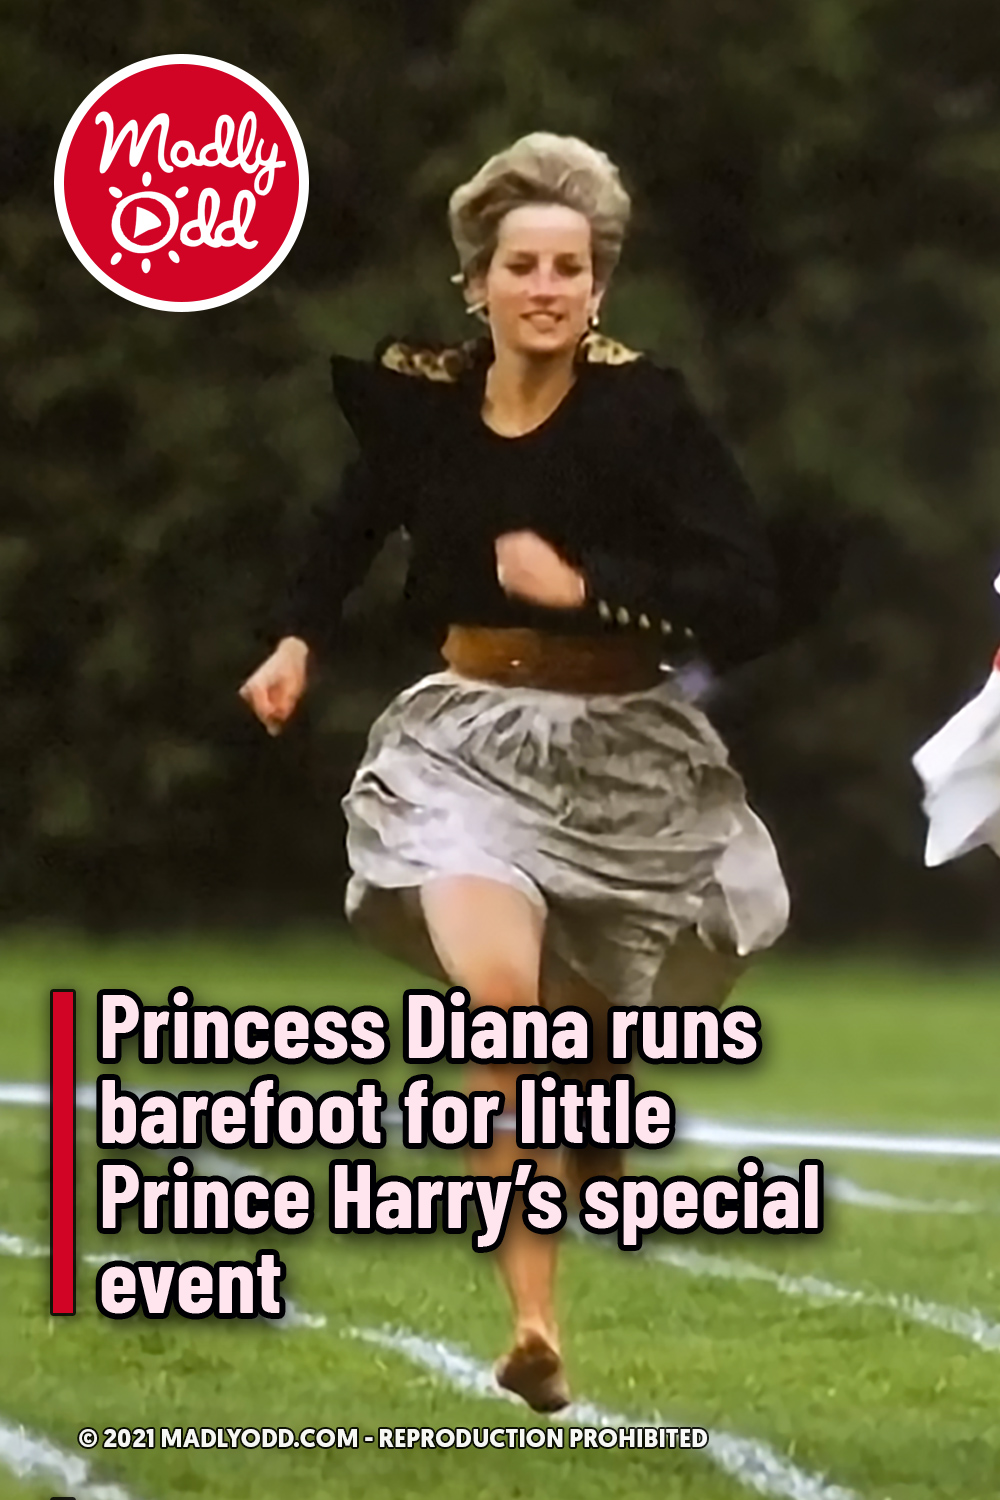 Princess Diana runs barefoot for little Prince Harry’s special event